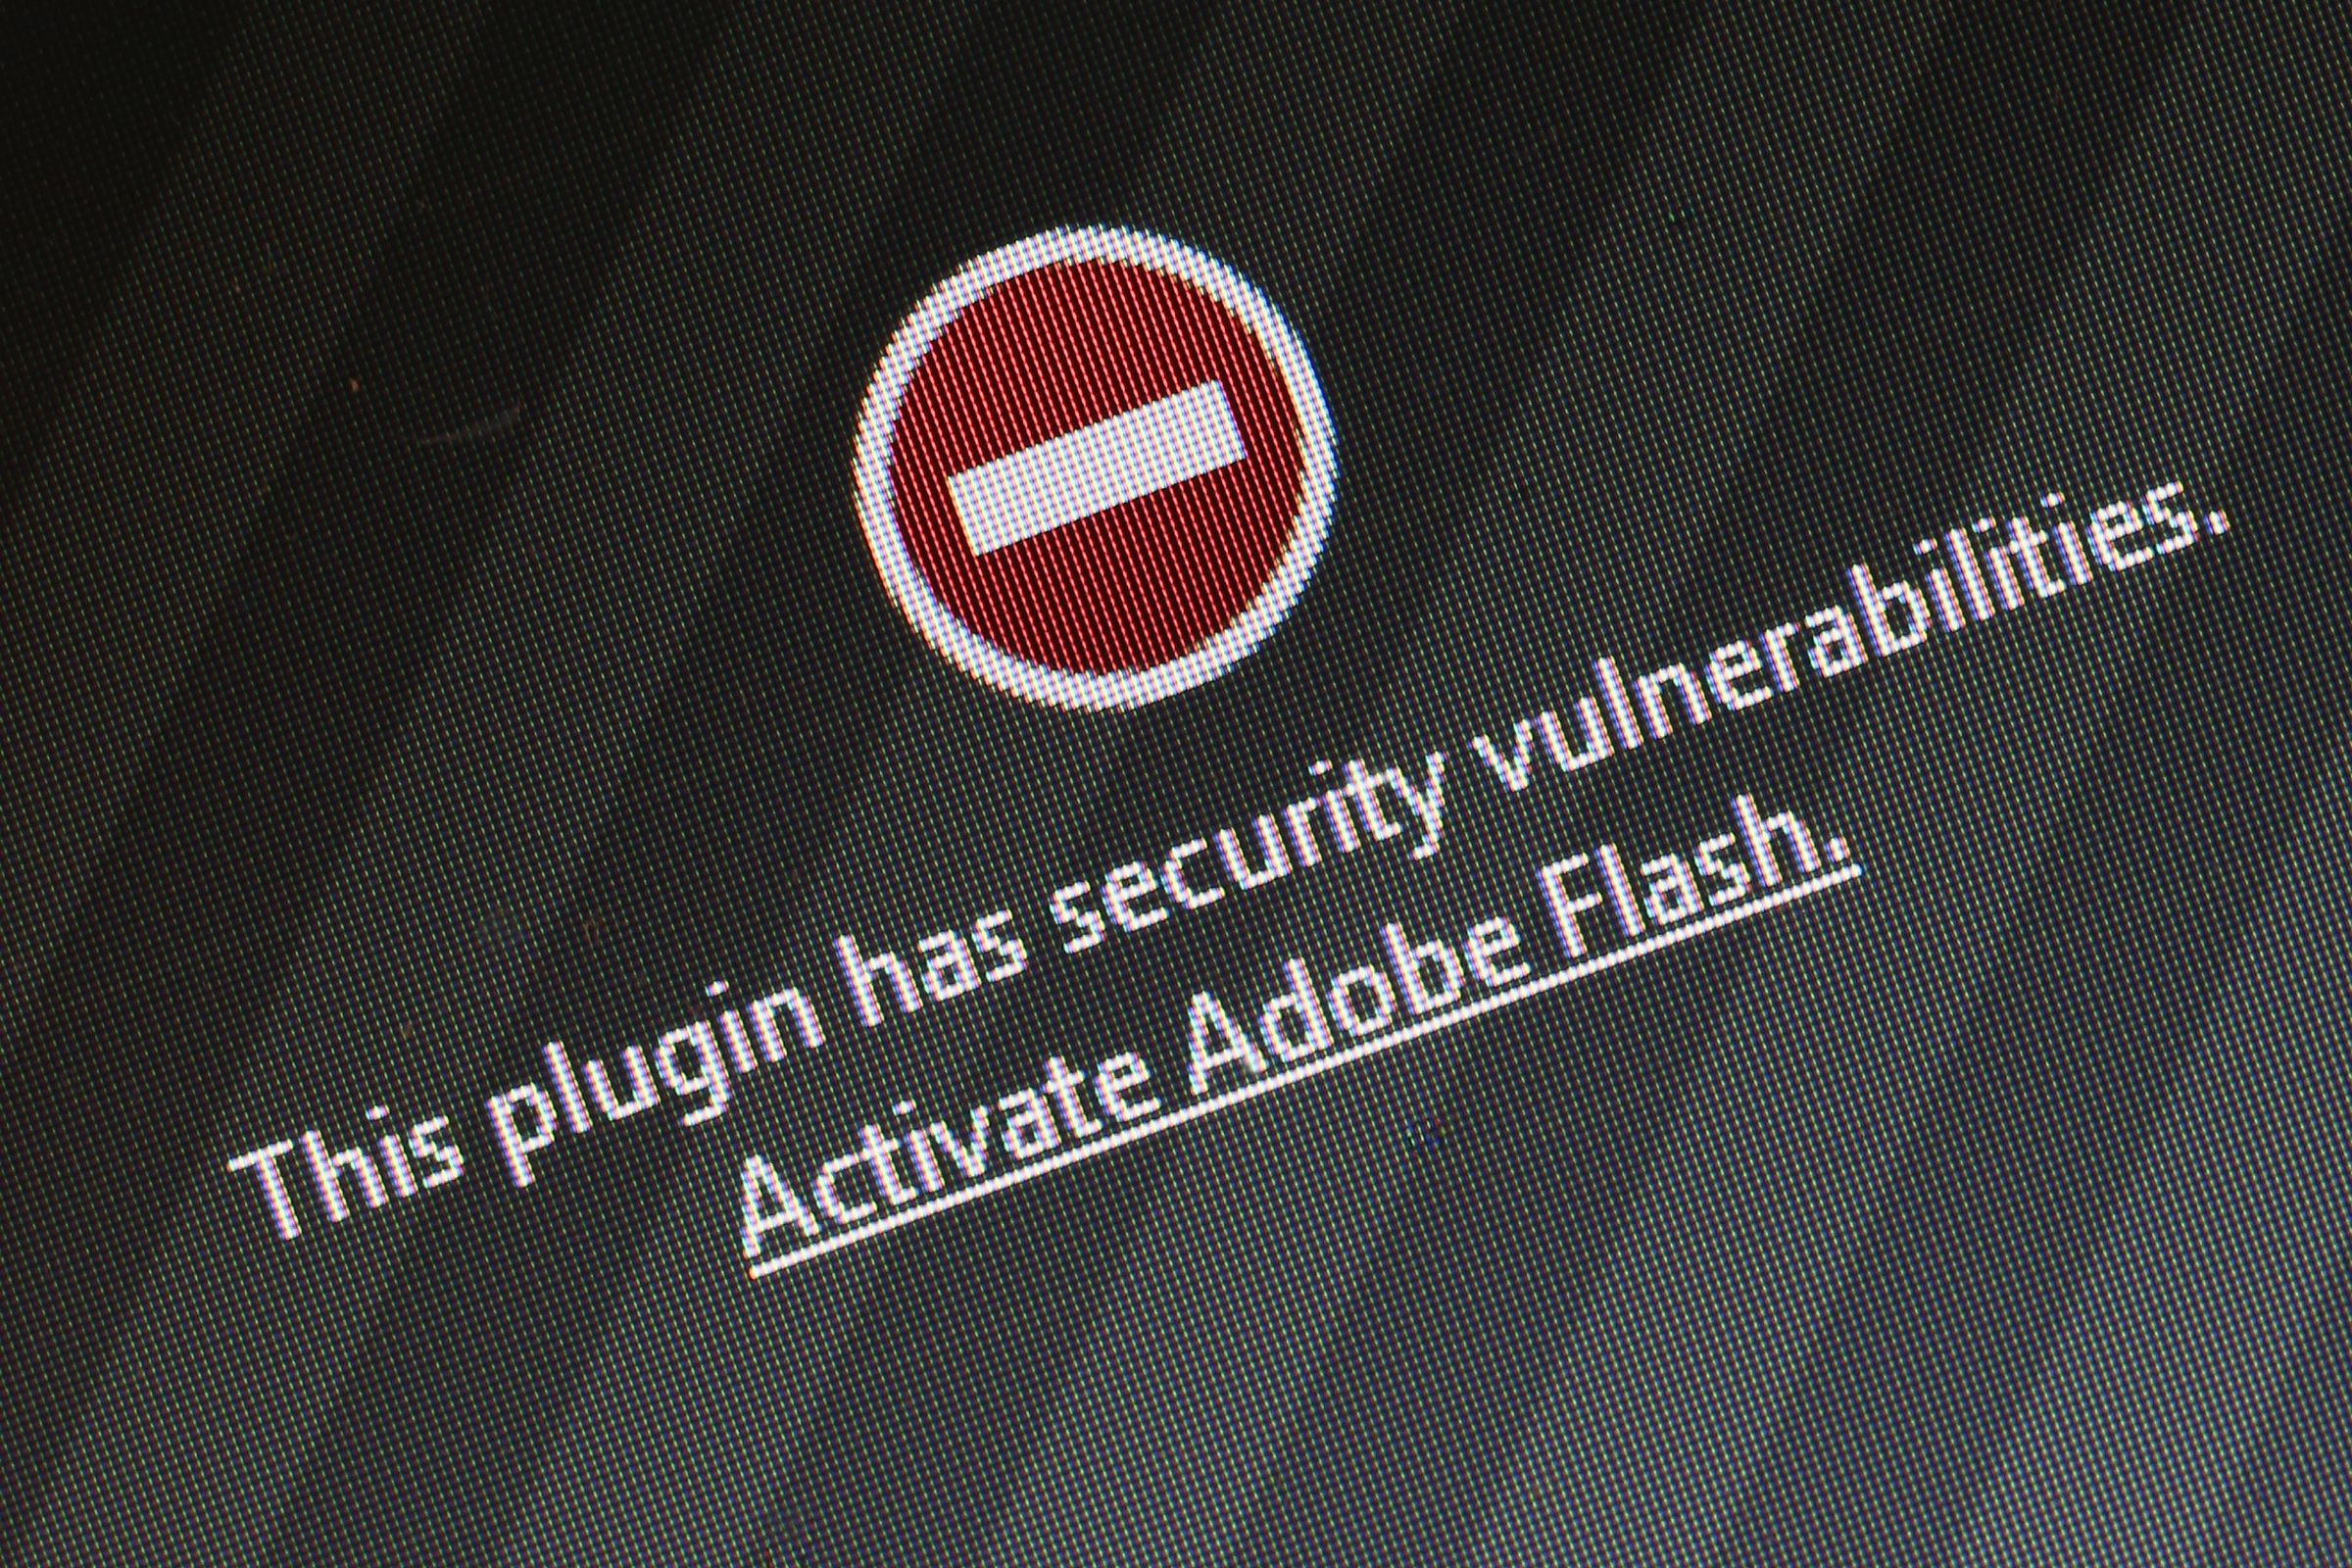 Mozilla Firefox Blocks Adobe Flash Due To Security Issue